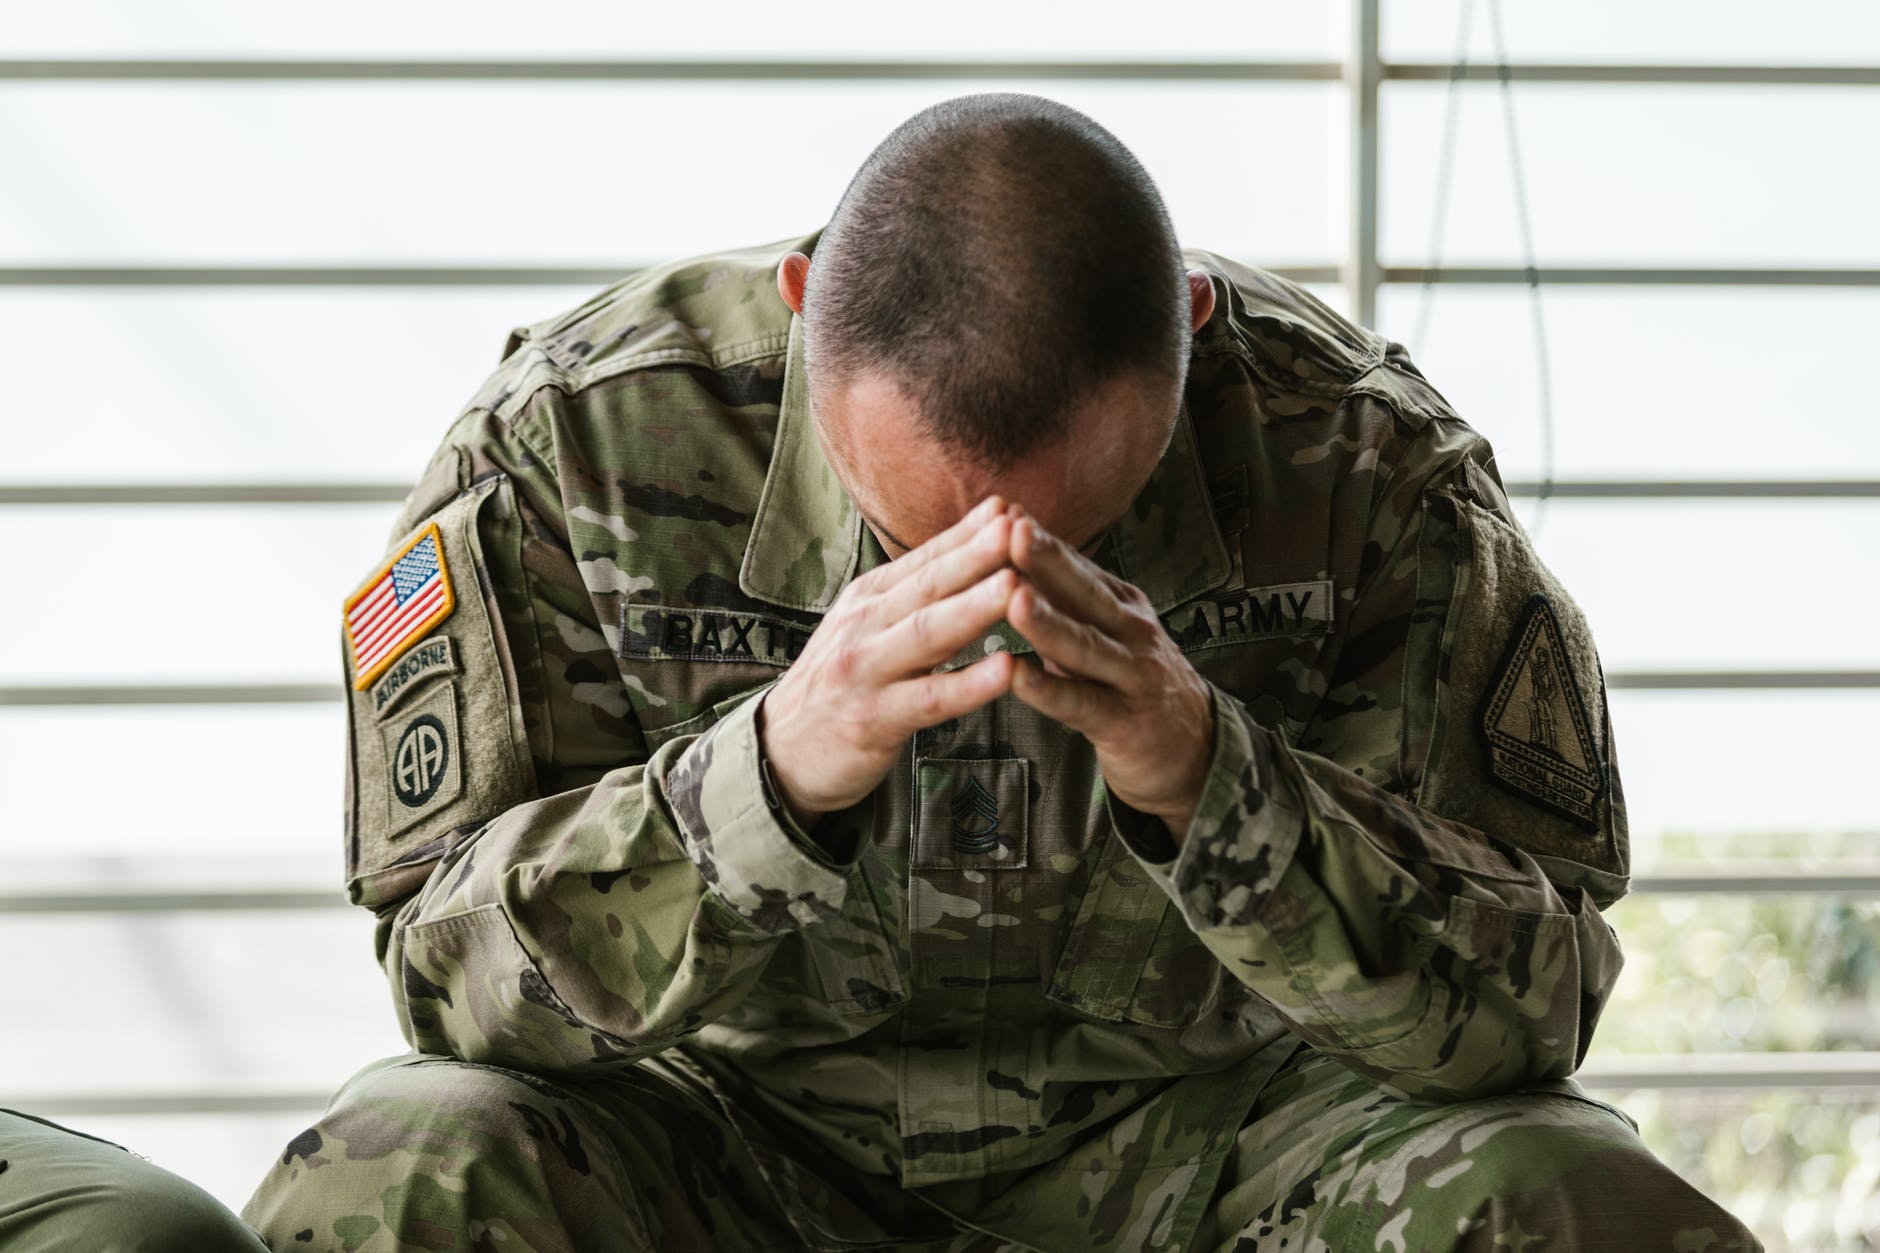 The worried military man | Photo: Pexels